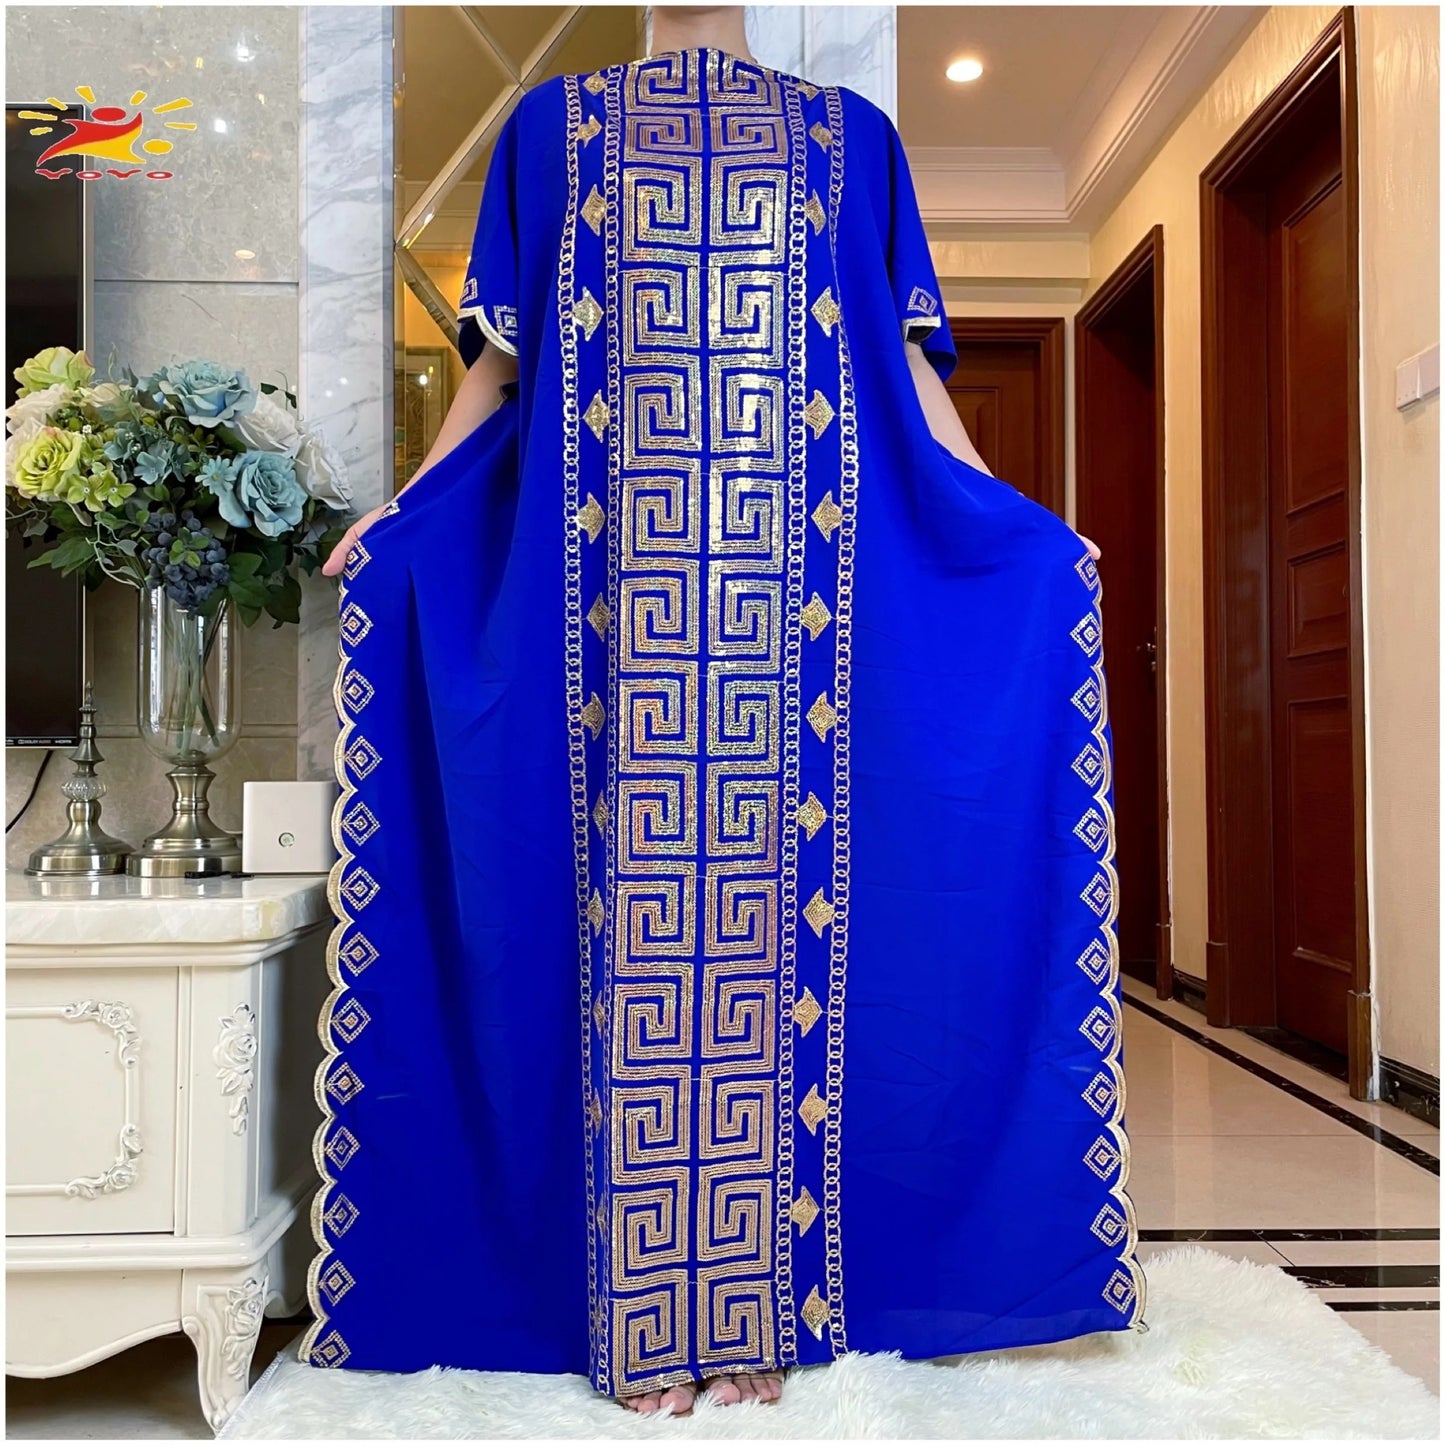 High Quality Comfortable Fabric Muslim Hijab Dresses African Caftan Rose Sequins Shinning Boubou Party Elegant Islamic Clothing